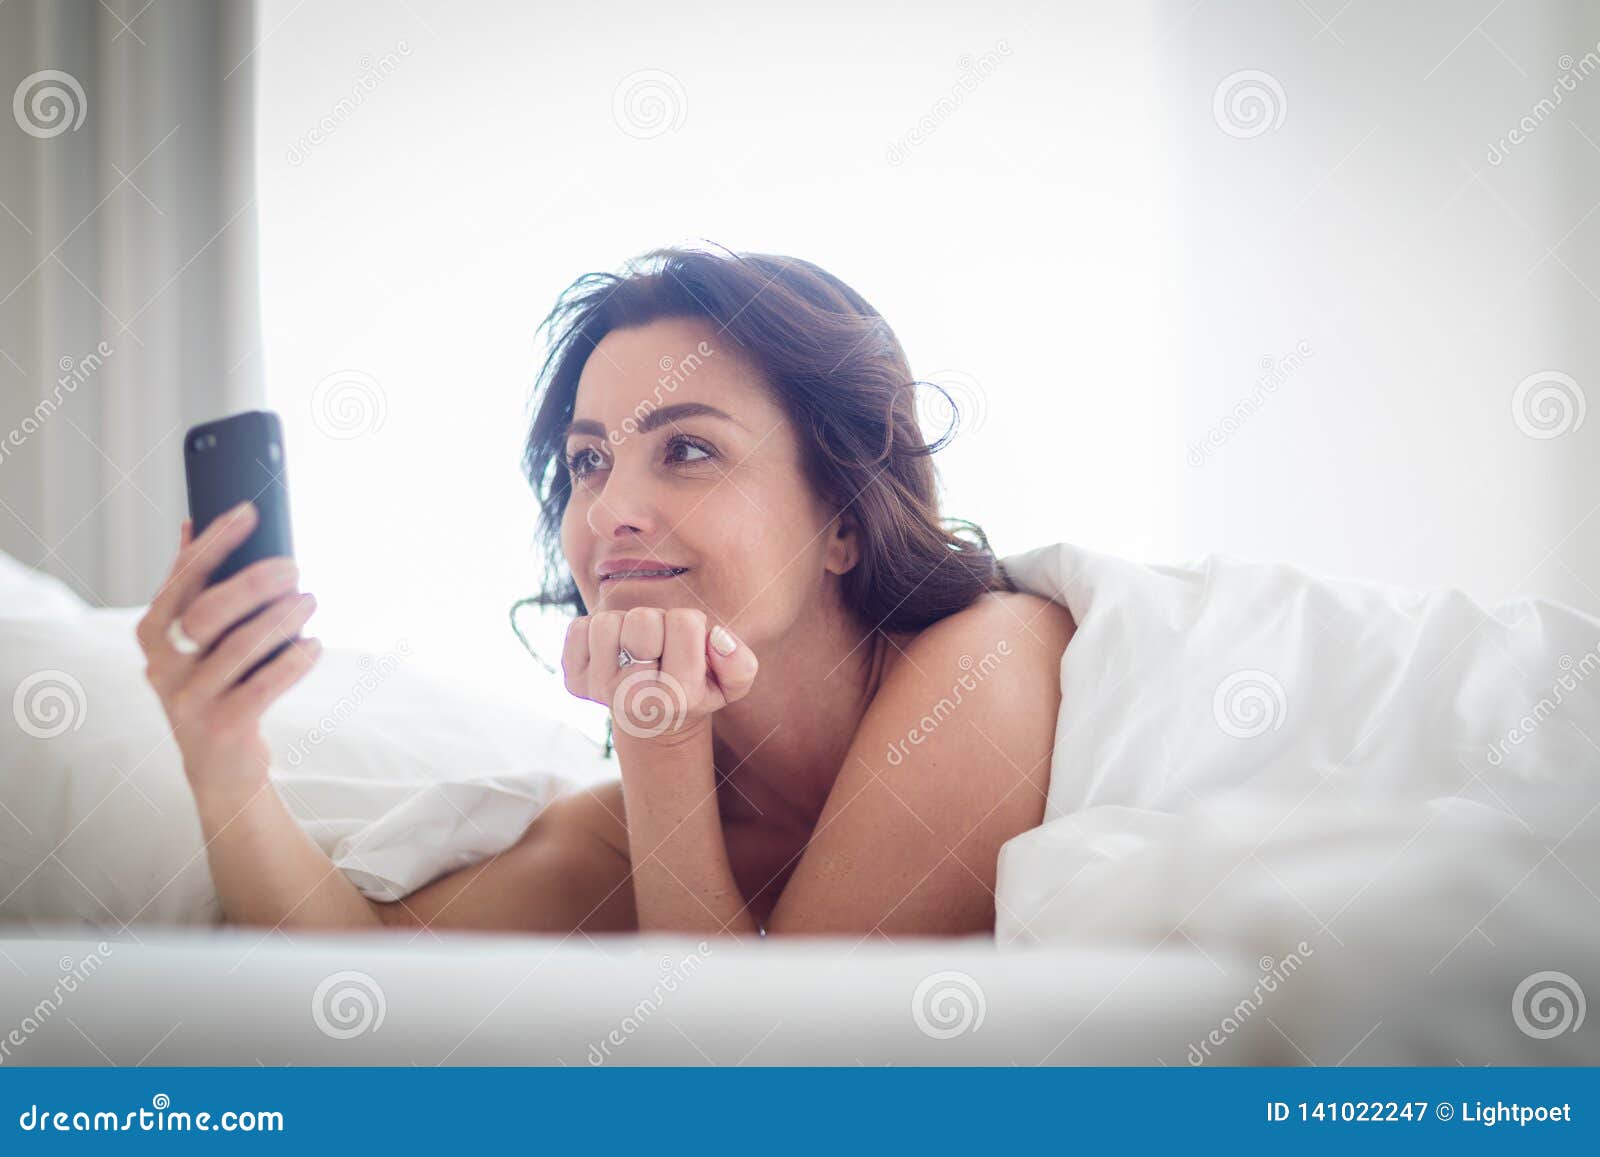 Beautiful Young Woman Using Her Cell Phone In Bed Stock Image Image Of Nightwear Bedroom